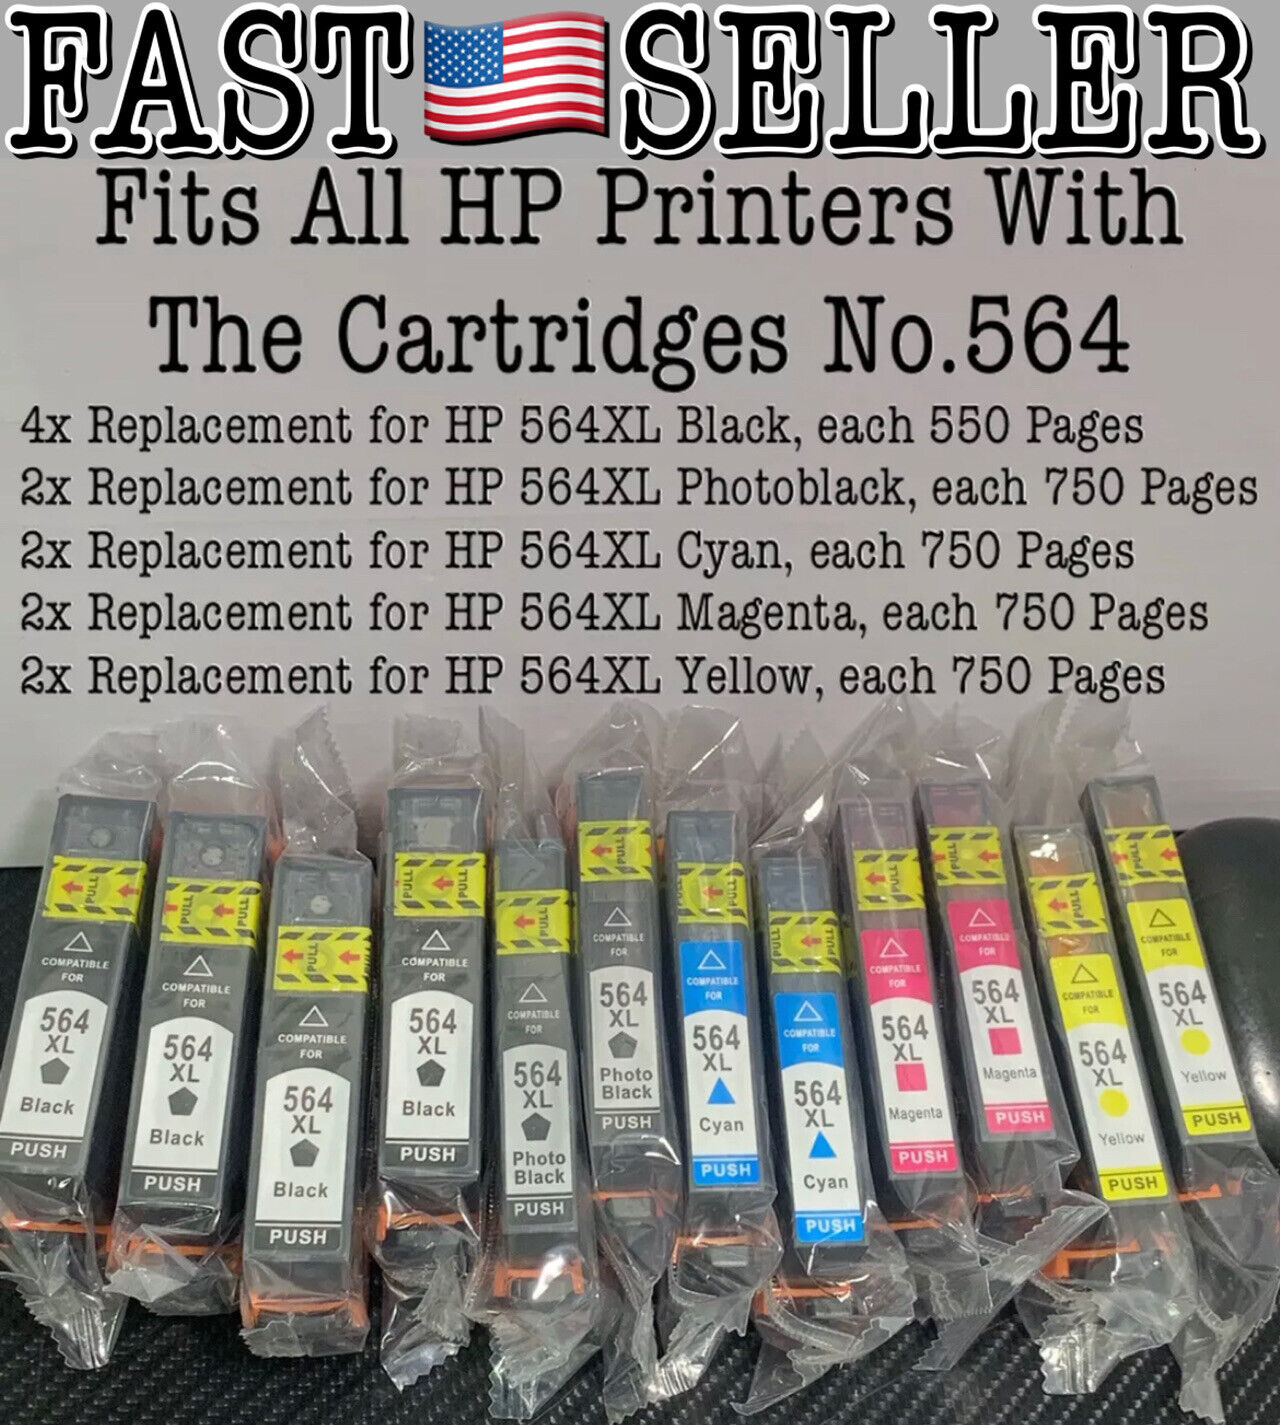 12-Pack Set HP 564 XL Ink Printer Cartridges Combo With PhotoSmart - SEALED